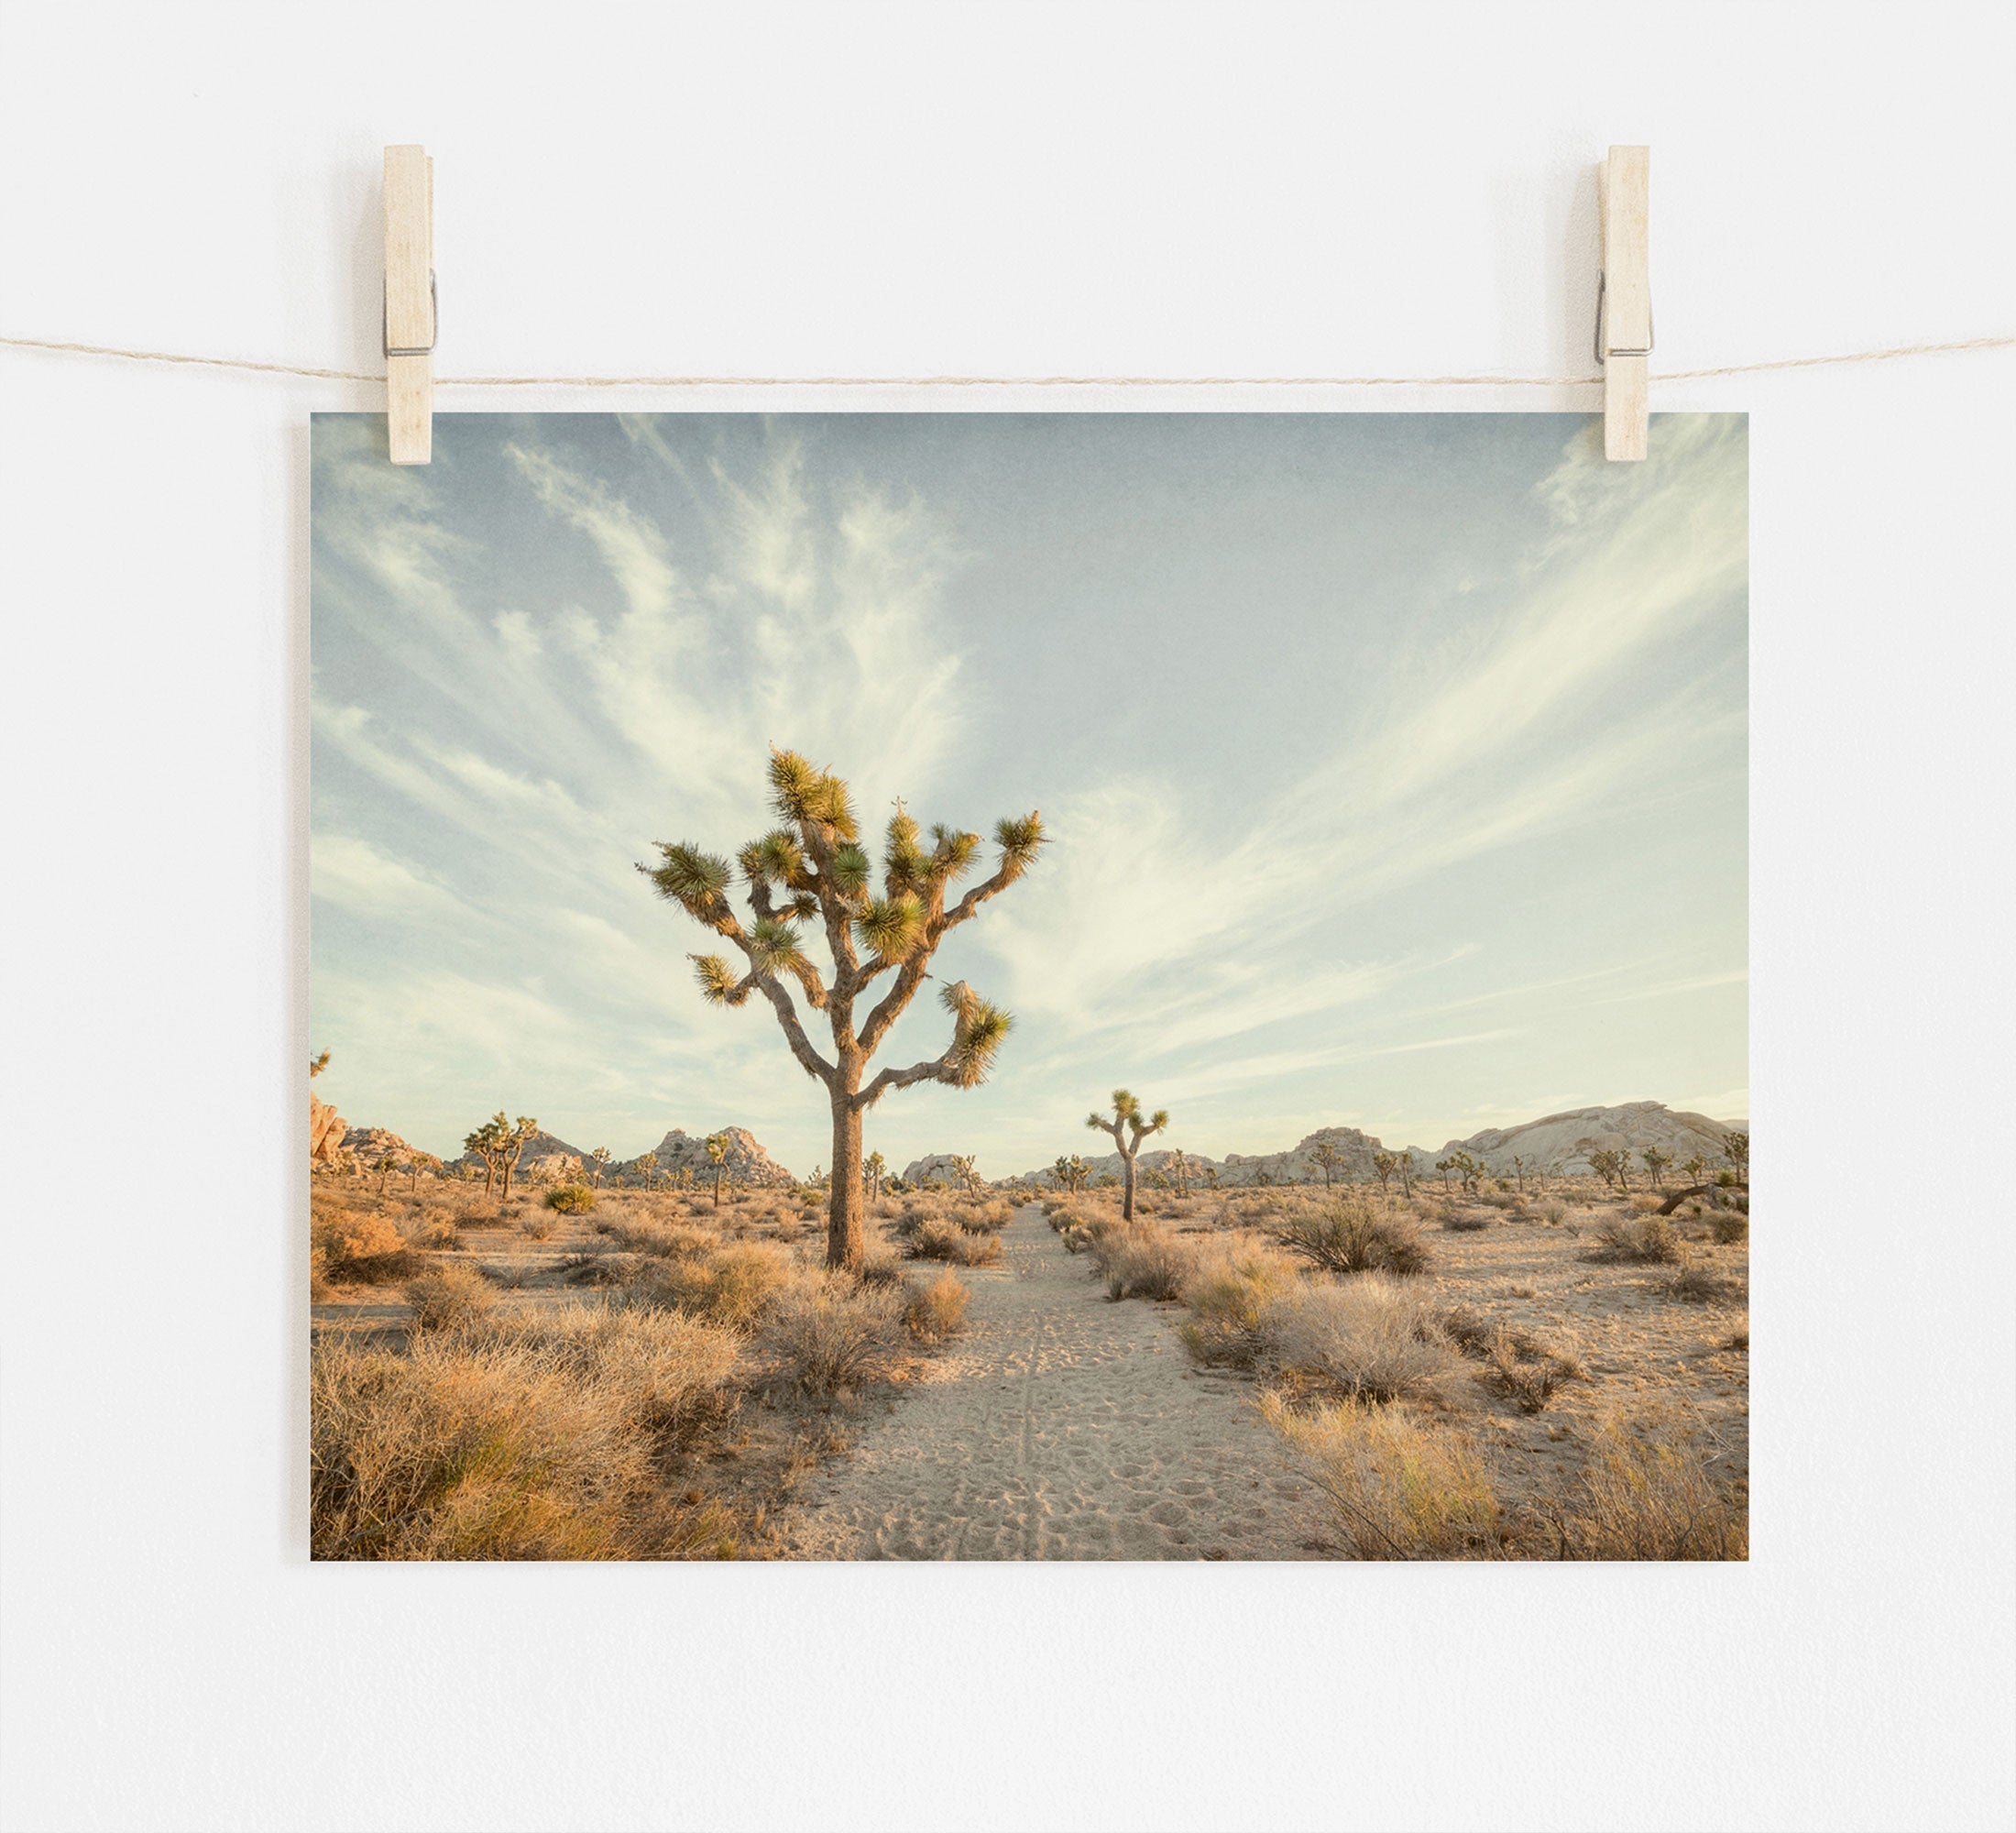 A photograph of a &#39;Path to Joshua&#39; joshua tree print by Offley Green, printed on archival photographic paper and pinned to a clothesline by two wooden clothespins against a clear sky background. The scene is serene with